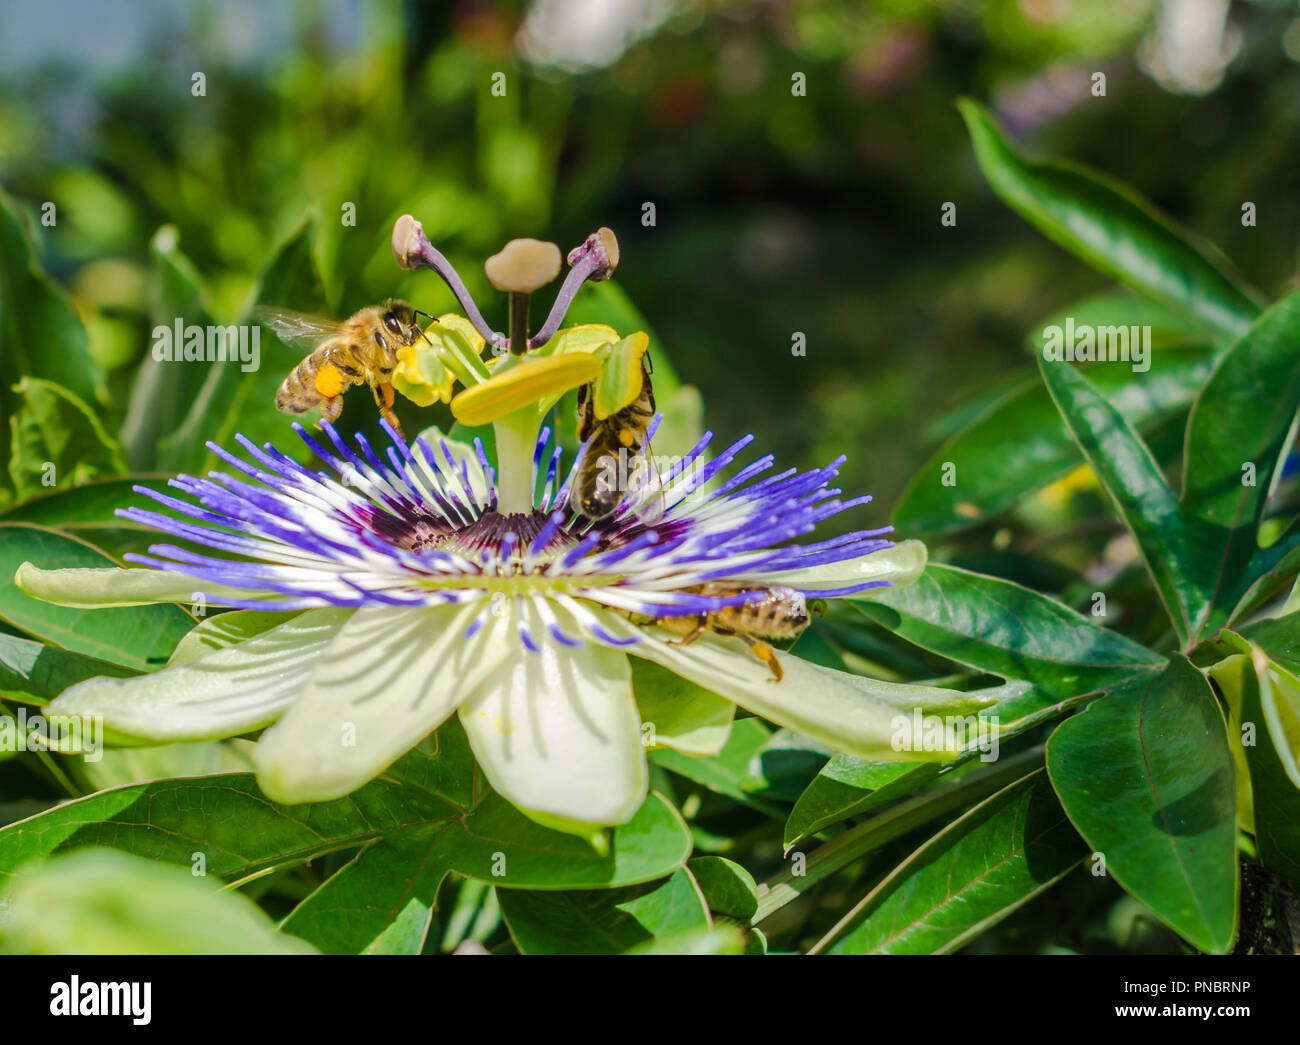 Bluecrown passionflower (Passiflora caerulea) flower,. Bees pollinating on a flower of passiflora. flower bee close up garden Stock Photo